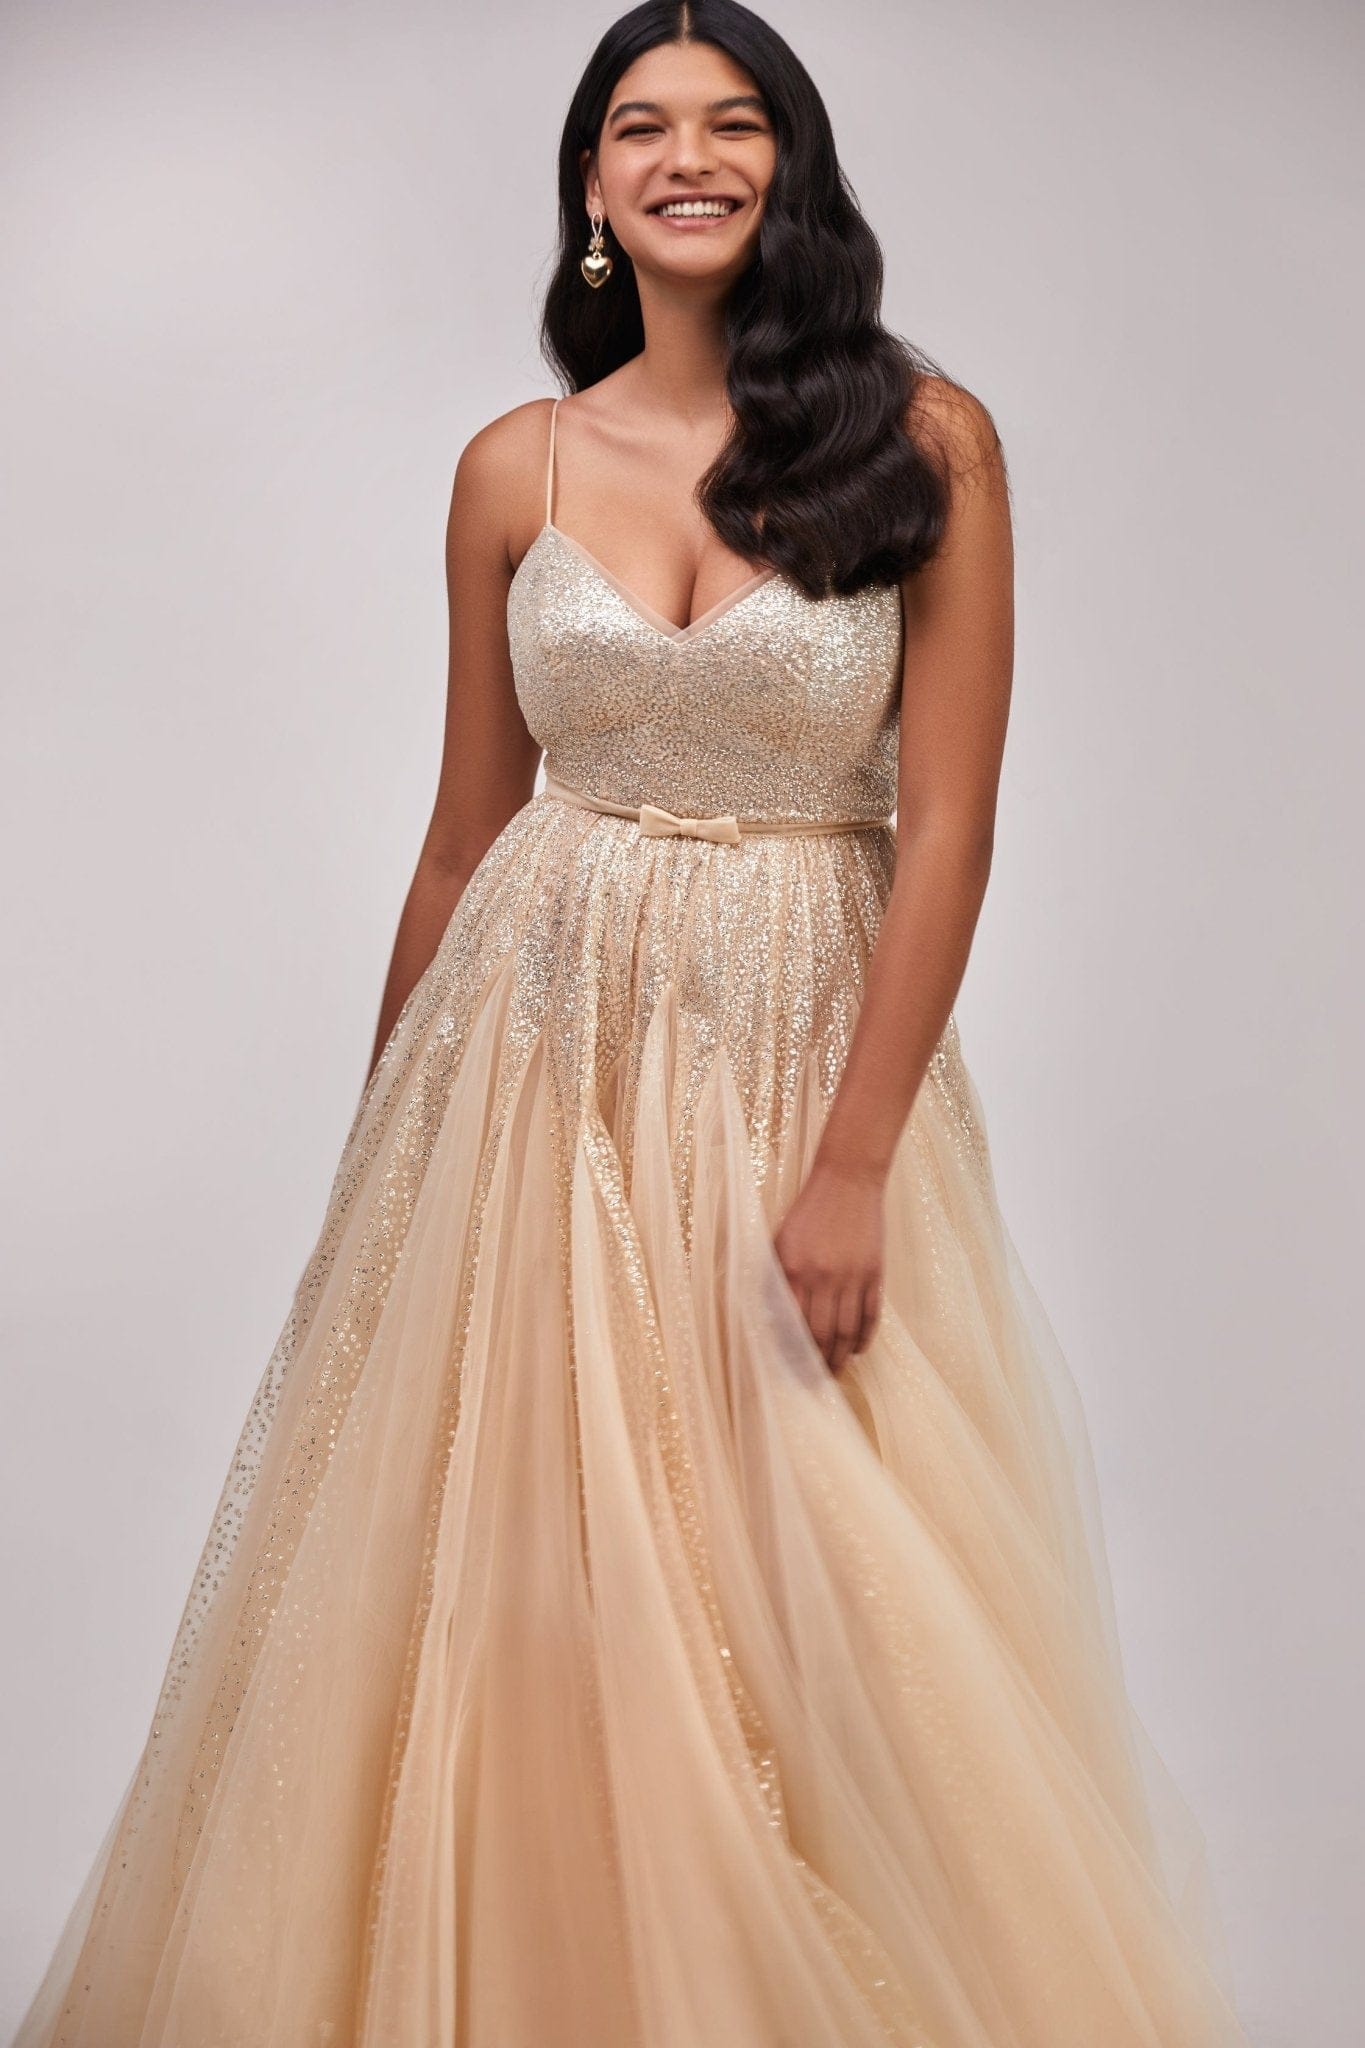 Melon Fitted maxi tulle dress sprinkled with glitter - Milla